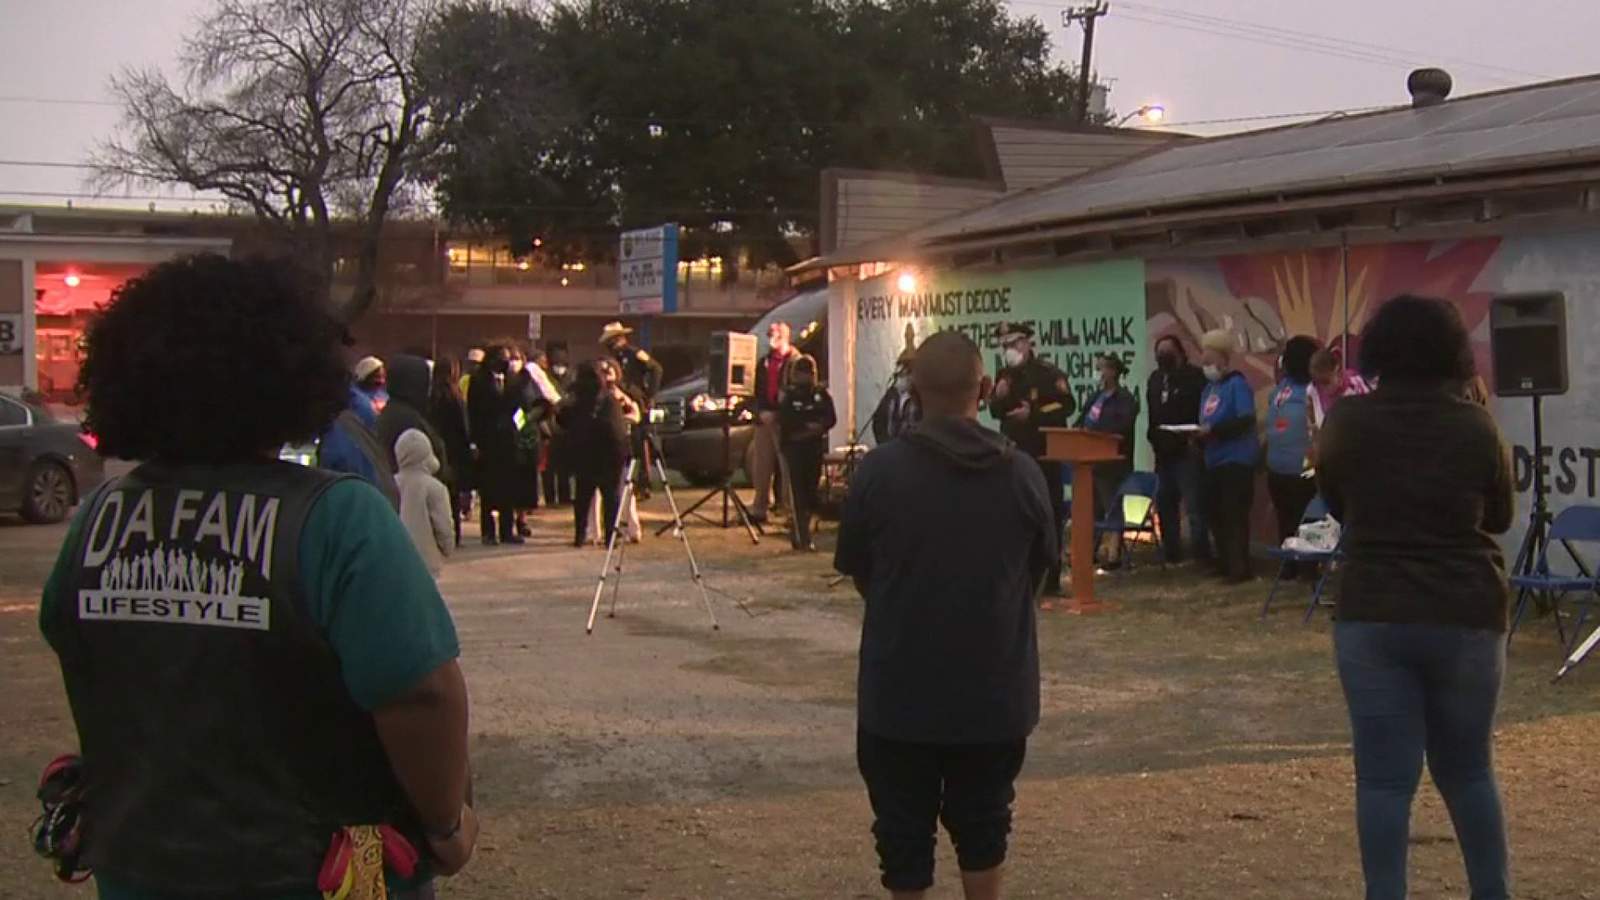 East Side residents come together to end gun violence after church shooting